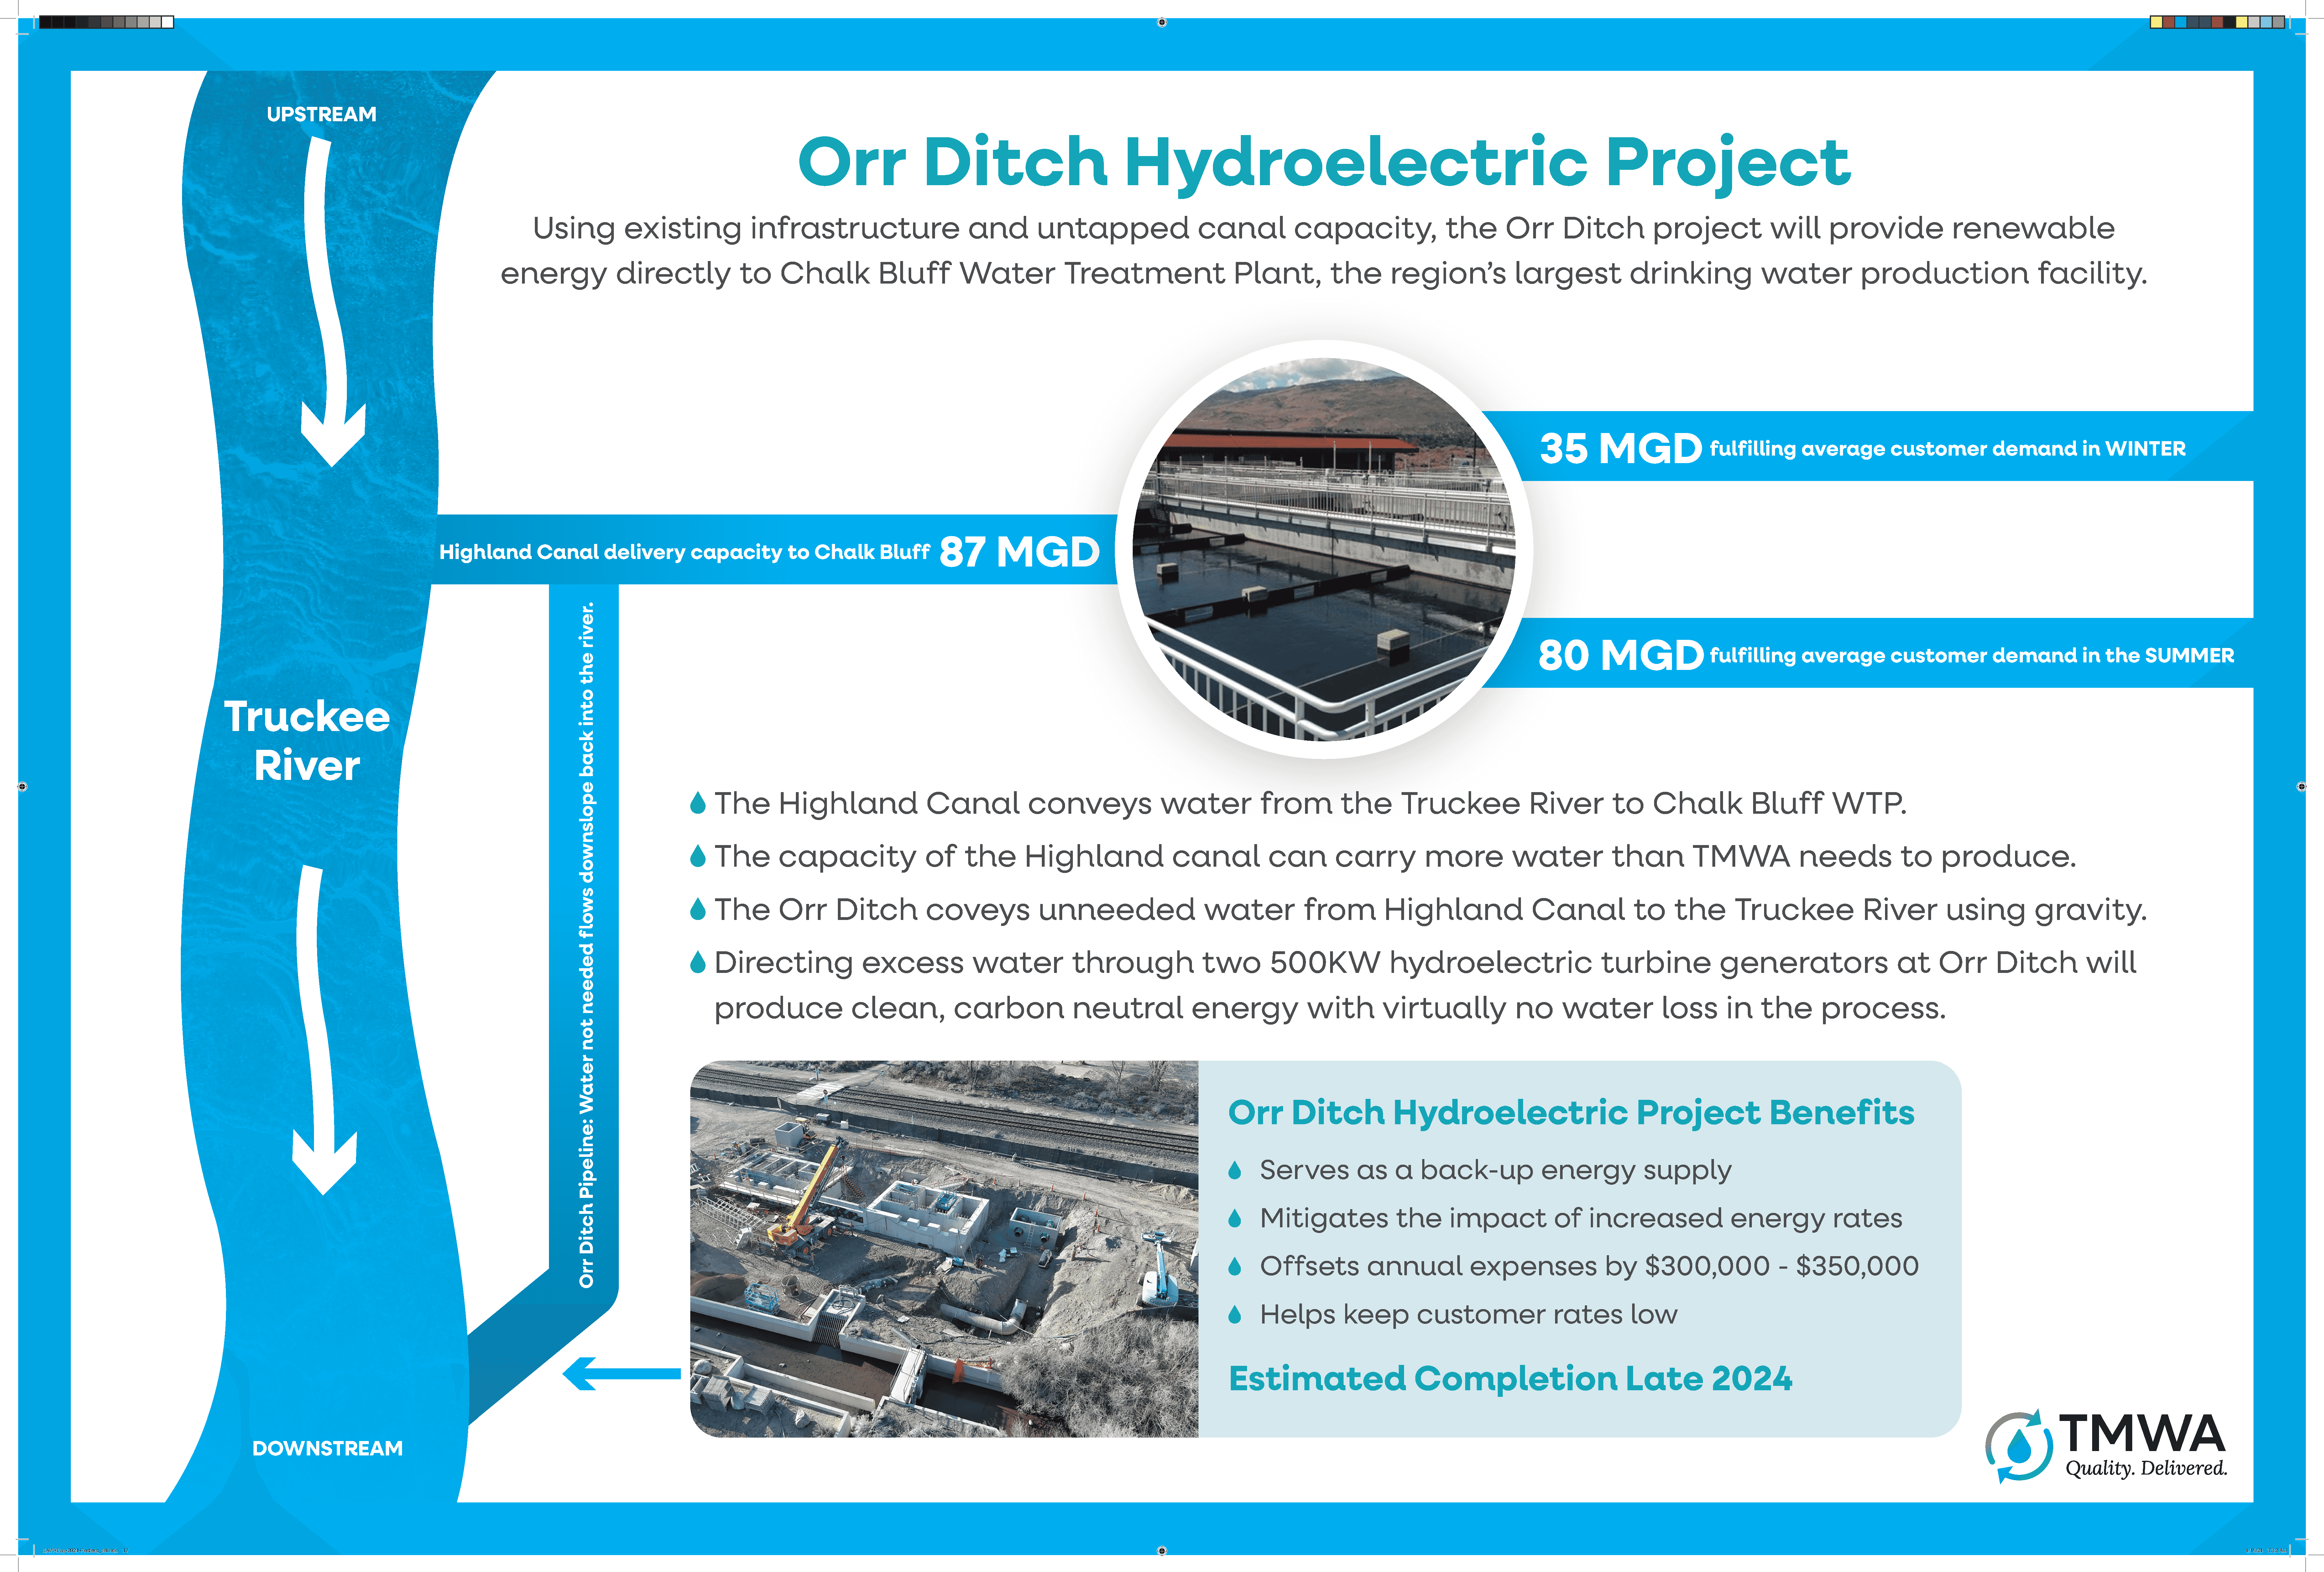 Hydroelectric Power: Project at Orr Ditch